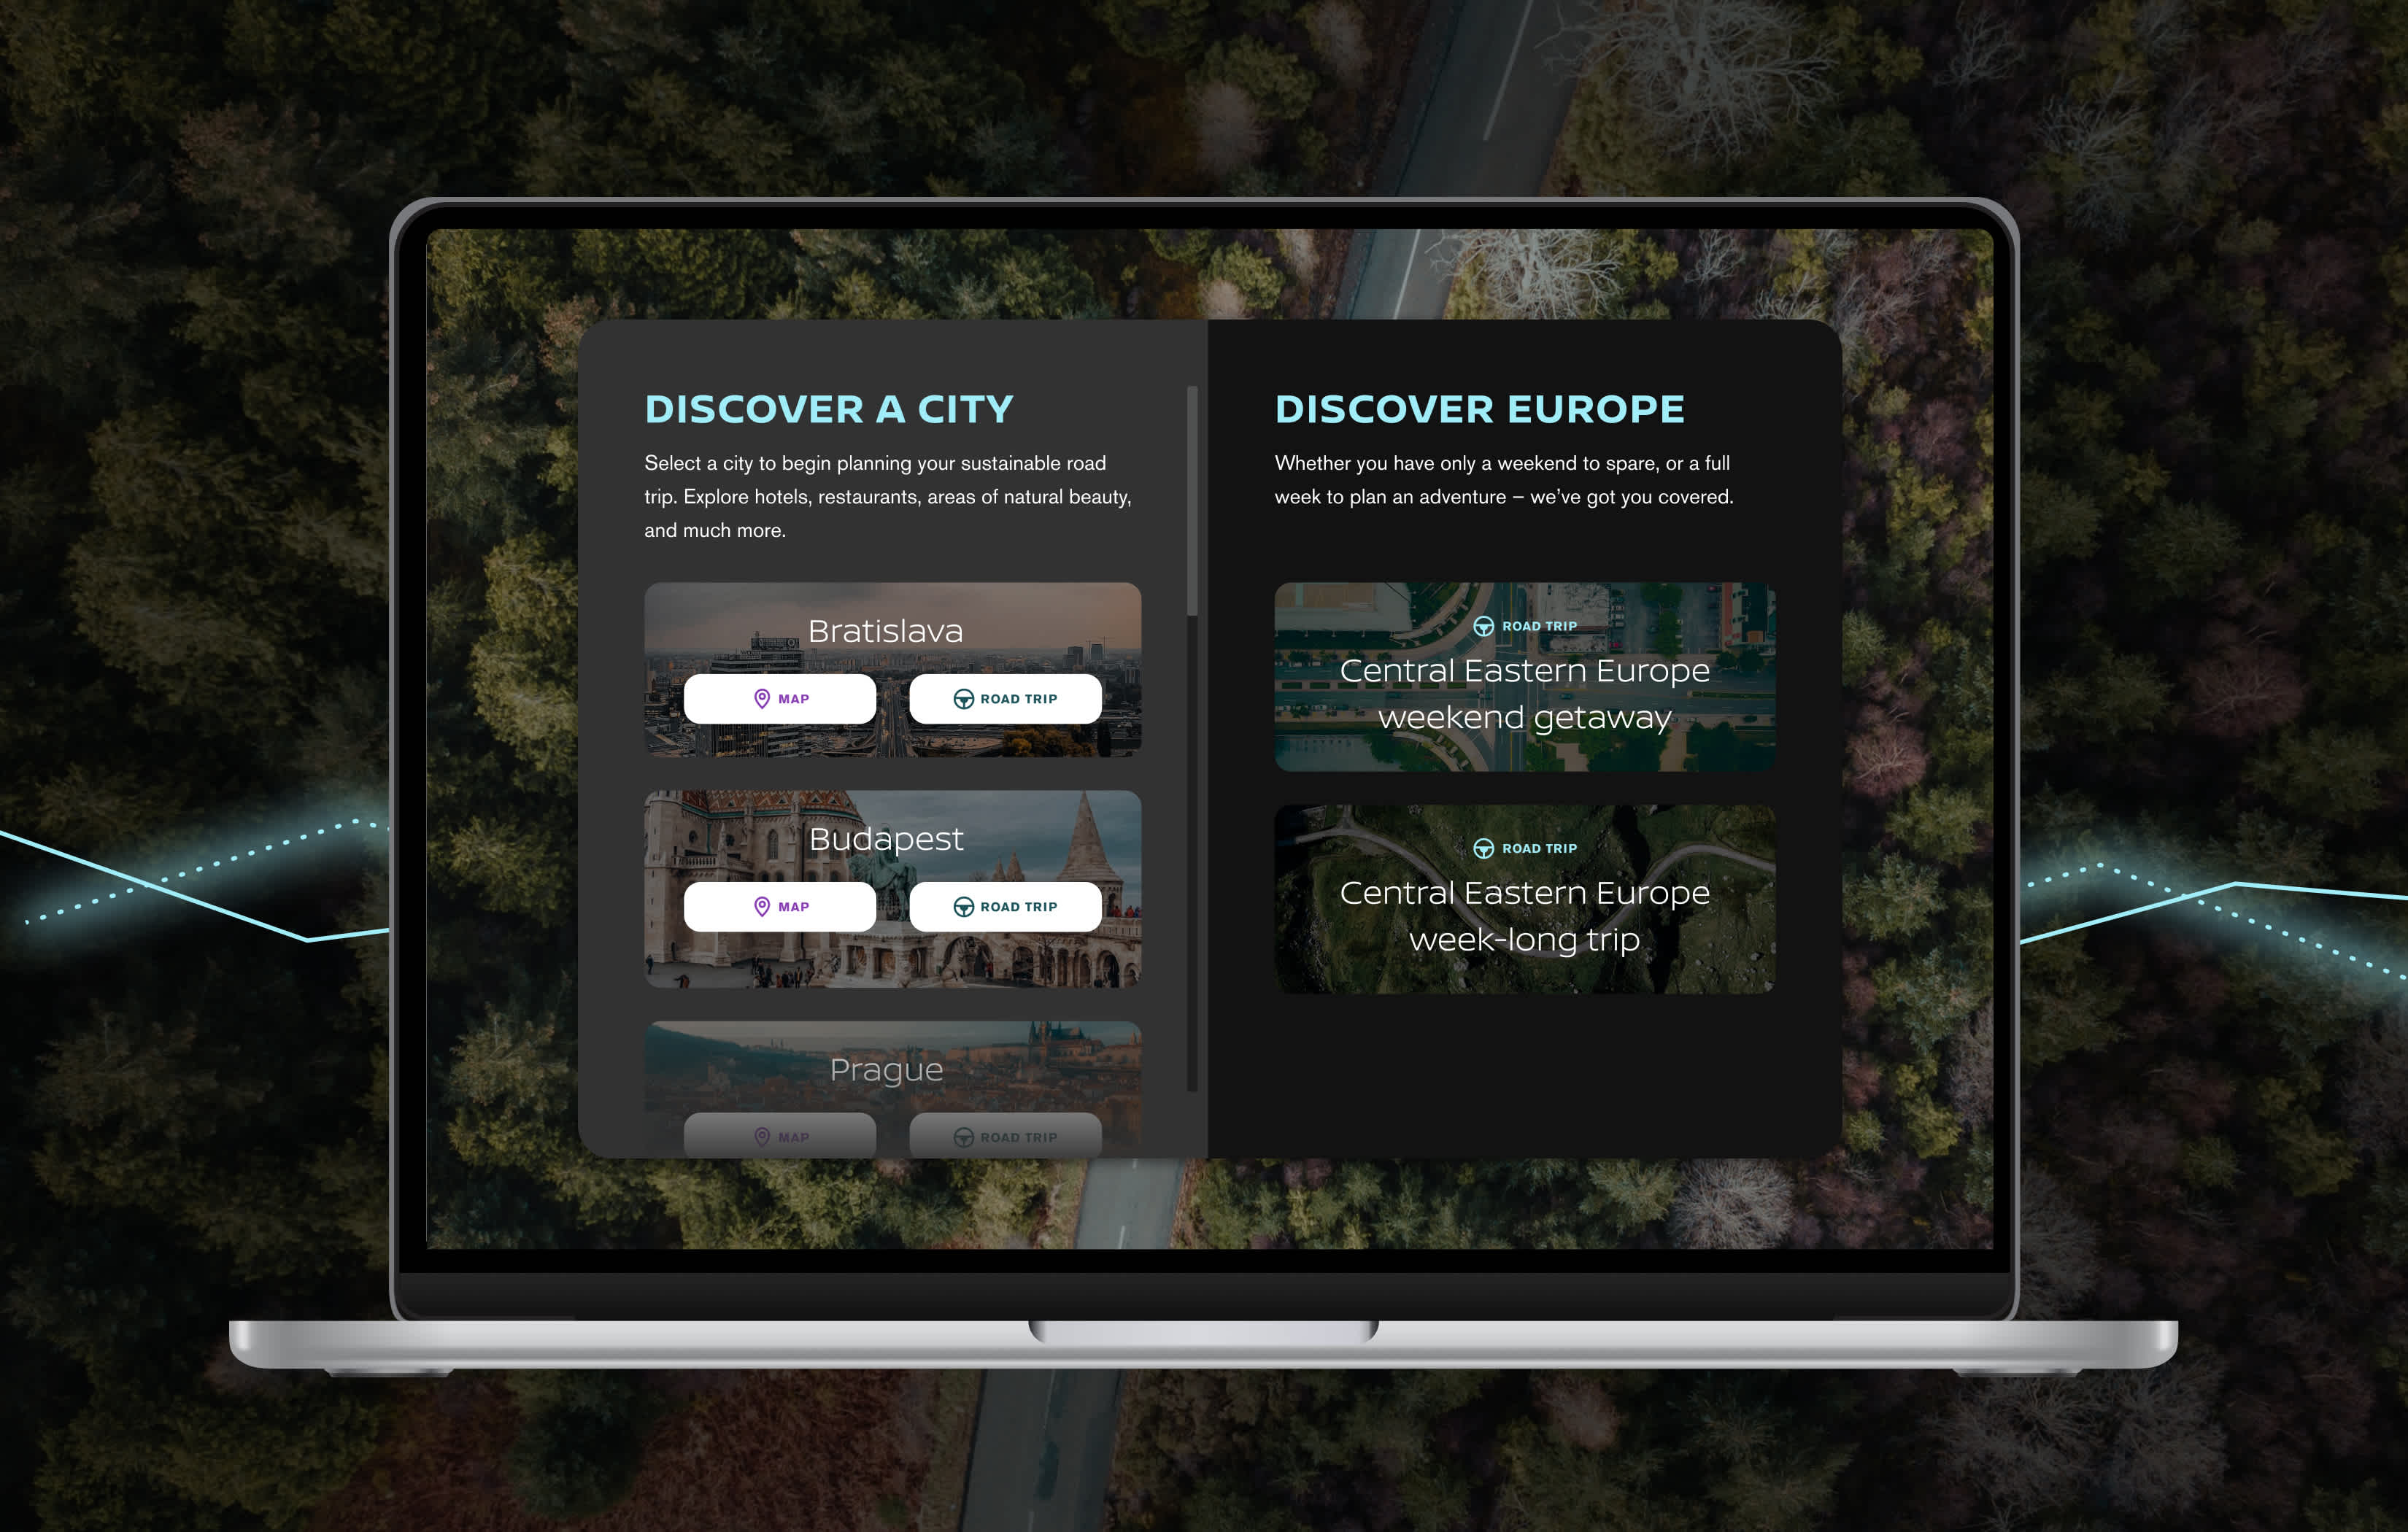 A laptop displaying the welcome screen on the travel guide where users can select a city